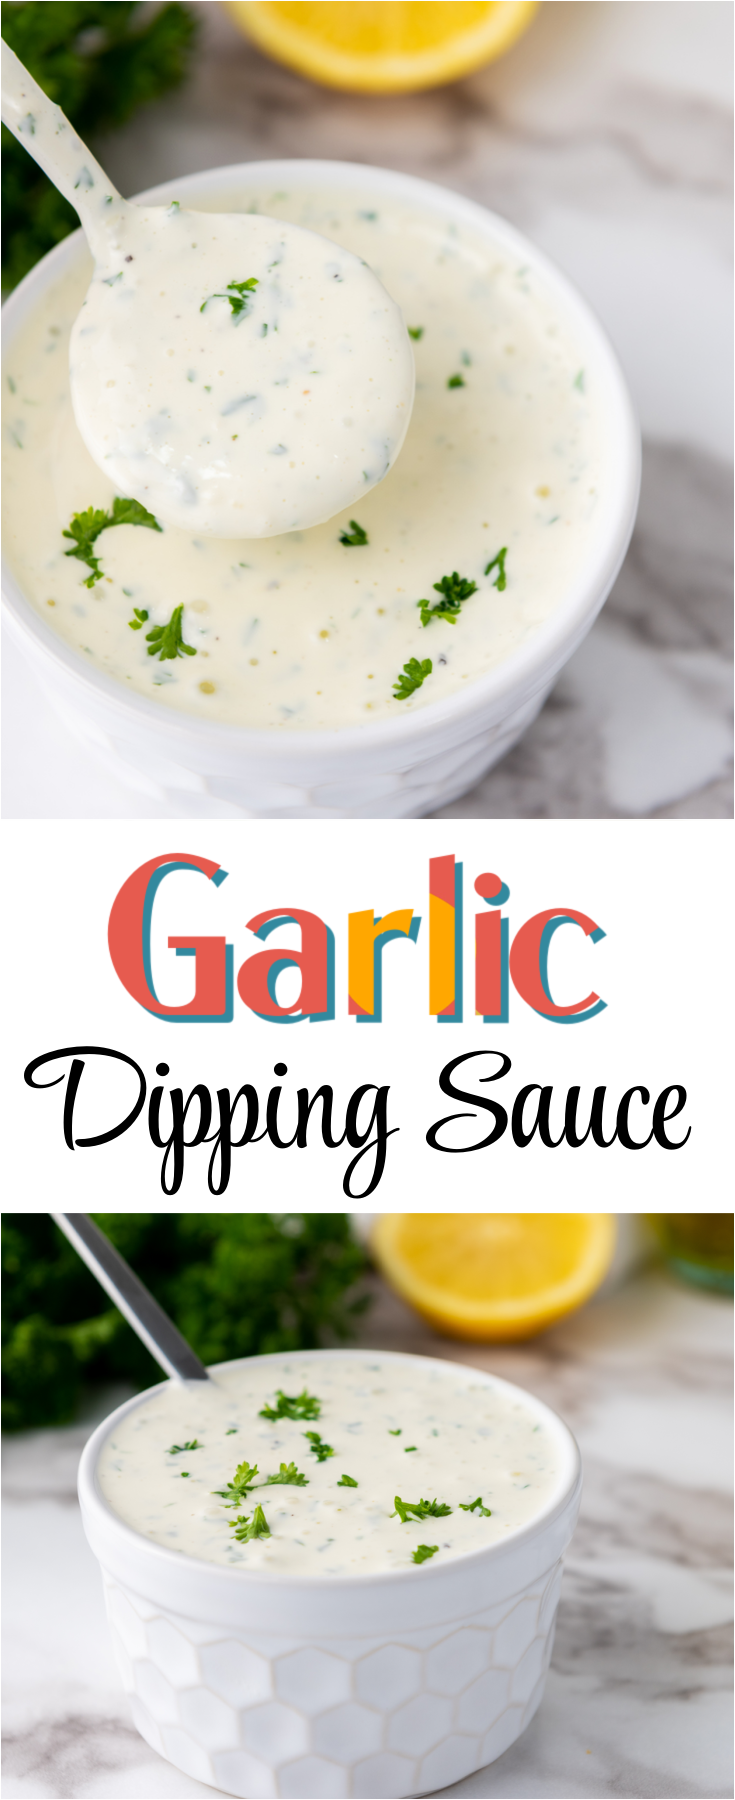 Easy to make Garlic Dipping Sauce, perfect for French fries, tacos, burgers, fish and so much more - throw this sauce together in just five minutes!  #garlic #dipping #sauce #condiment